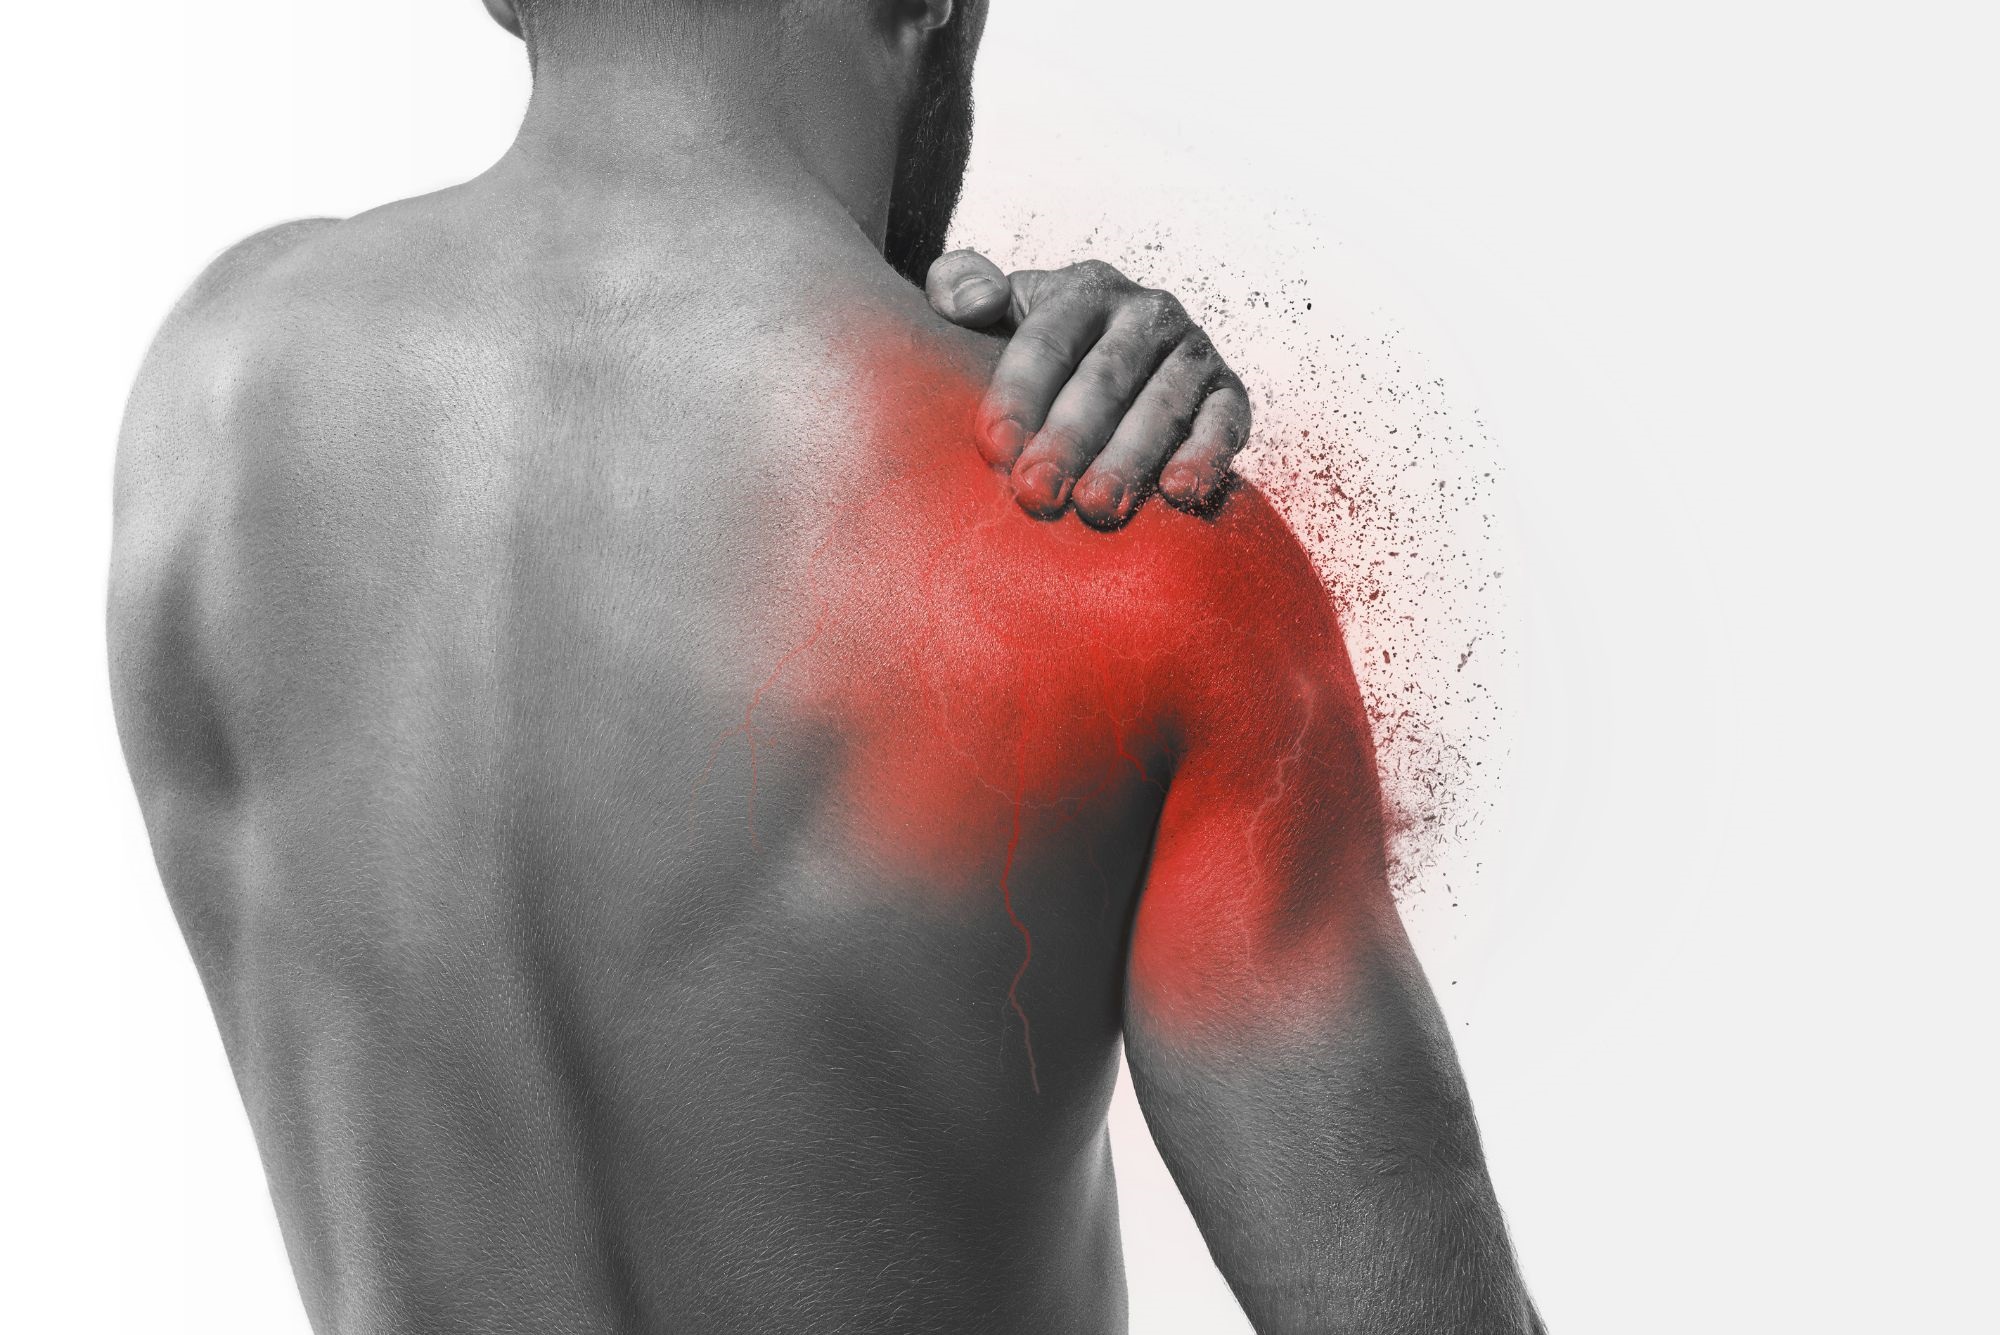 4 Most Common Causes Of Burning Pain In Shoulder That Stop You From Picking Up The Kids, Sports, And Enjoying Hobbies